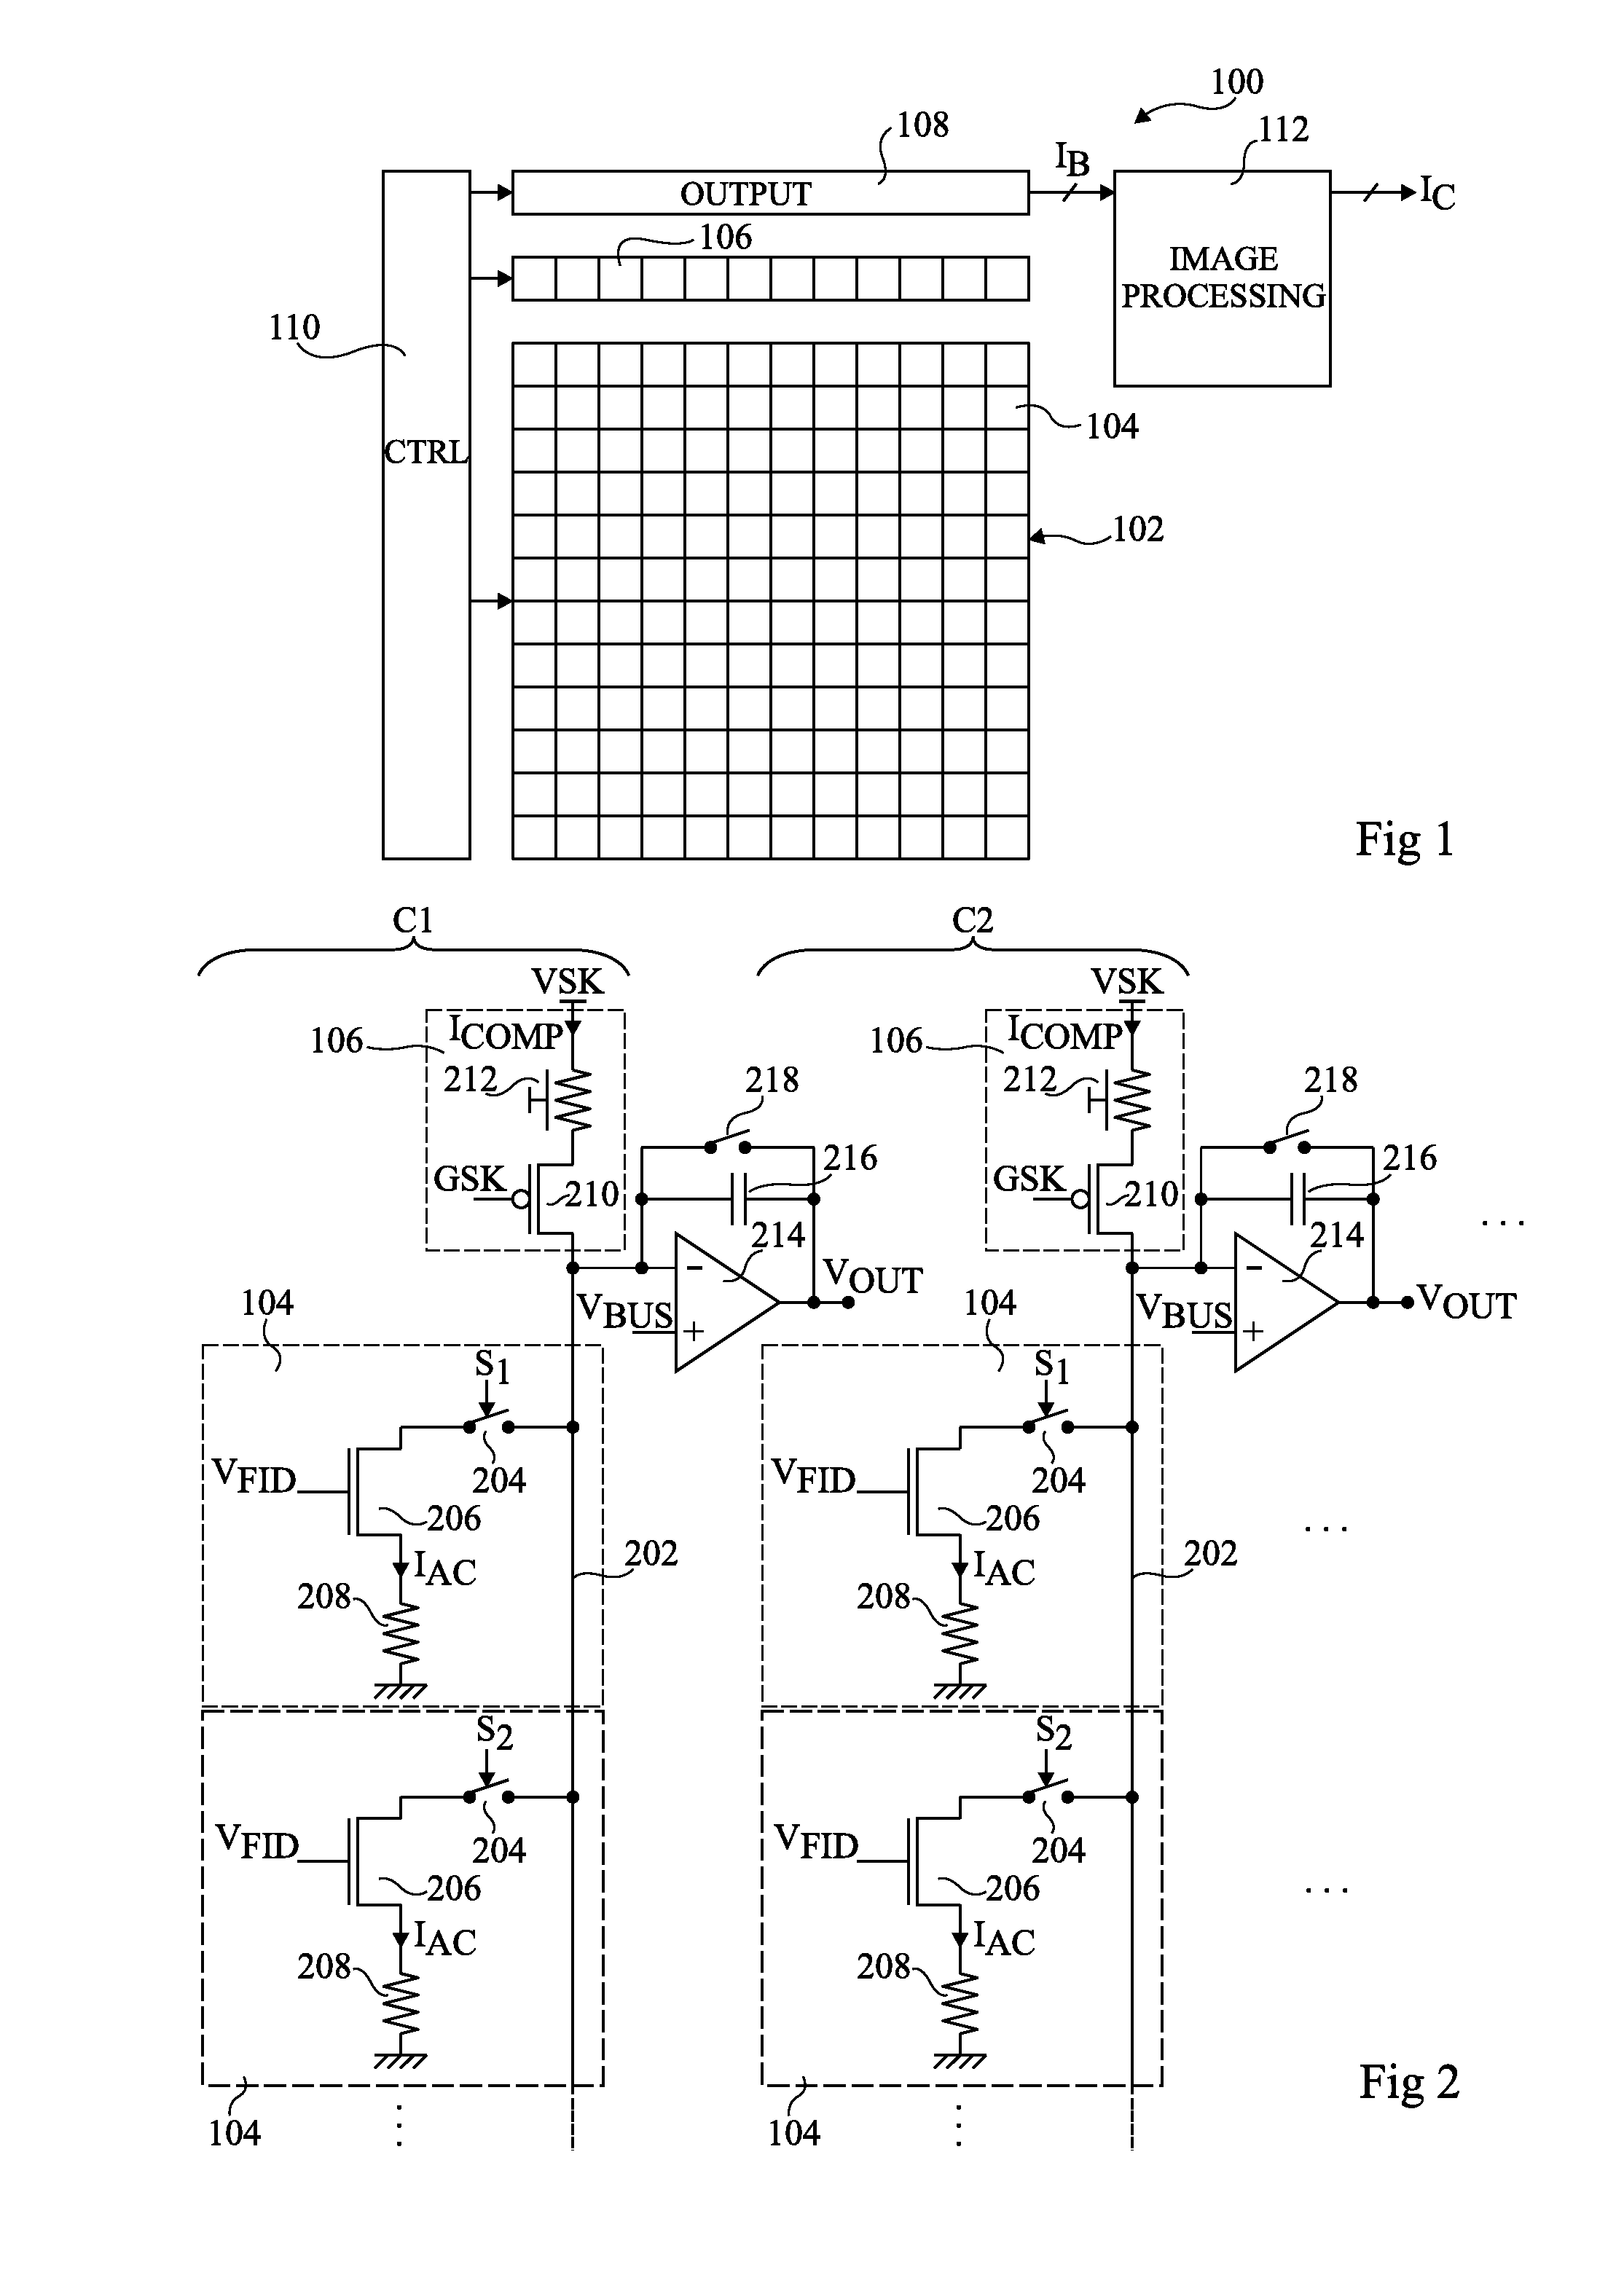 Method of infrared image processing for non-uniformity correction